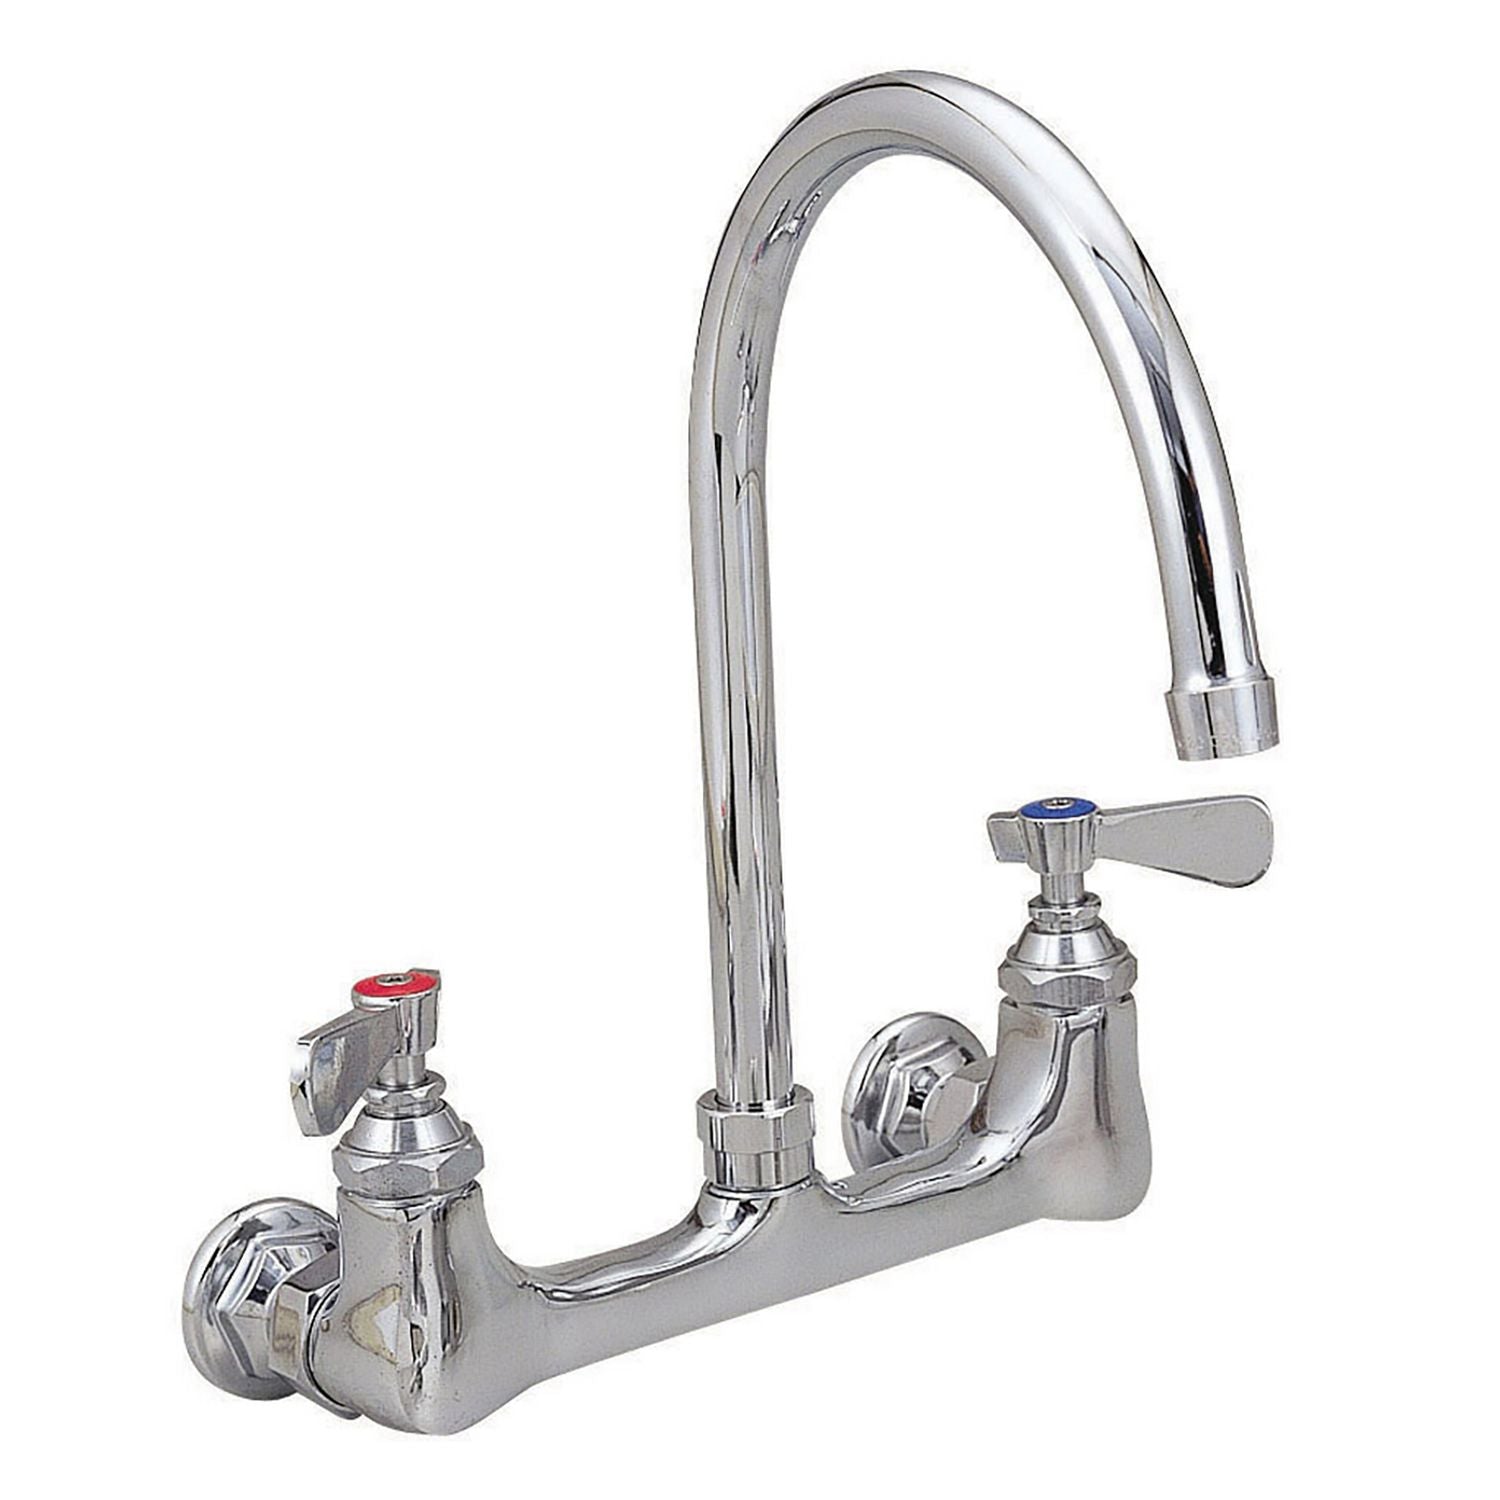 workforce-standard-duty-faucet-95-height-5-reach-chrome-plated-brass-ships-in-4-6-business-days_bkebkfw5gm - 1